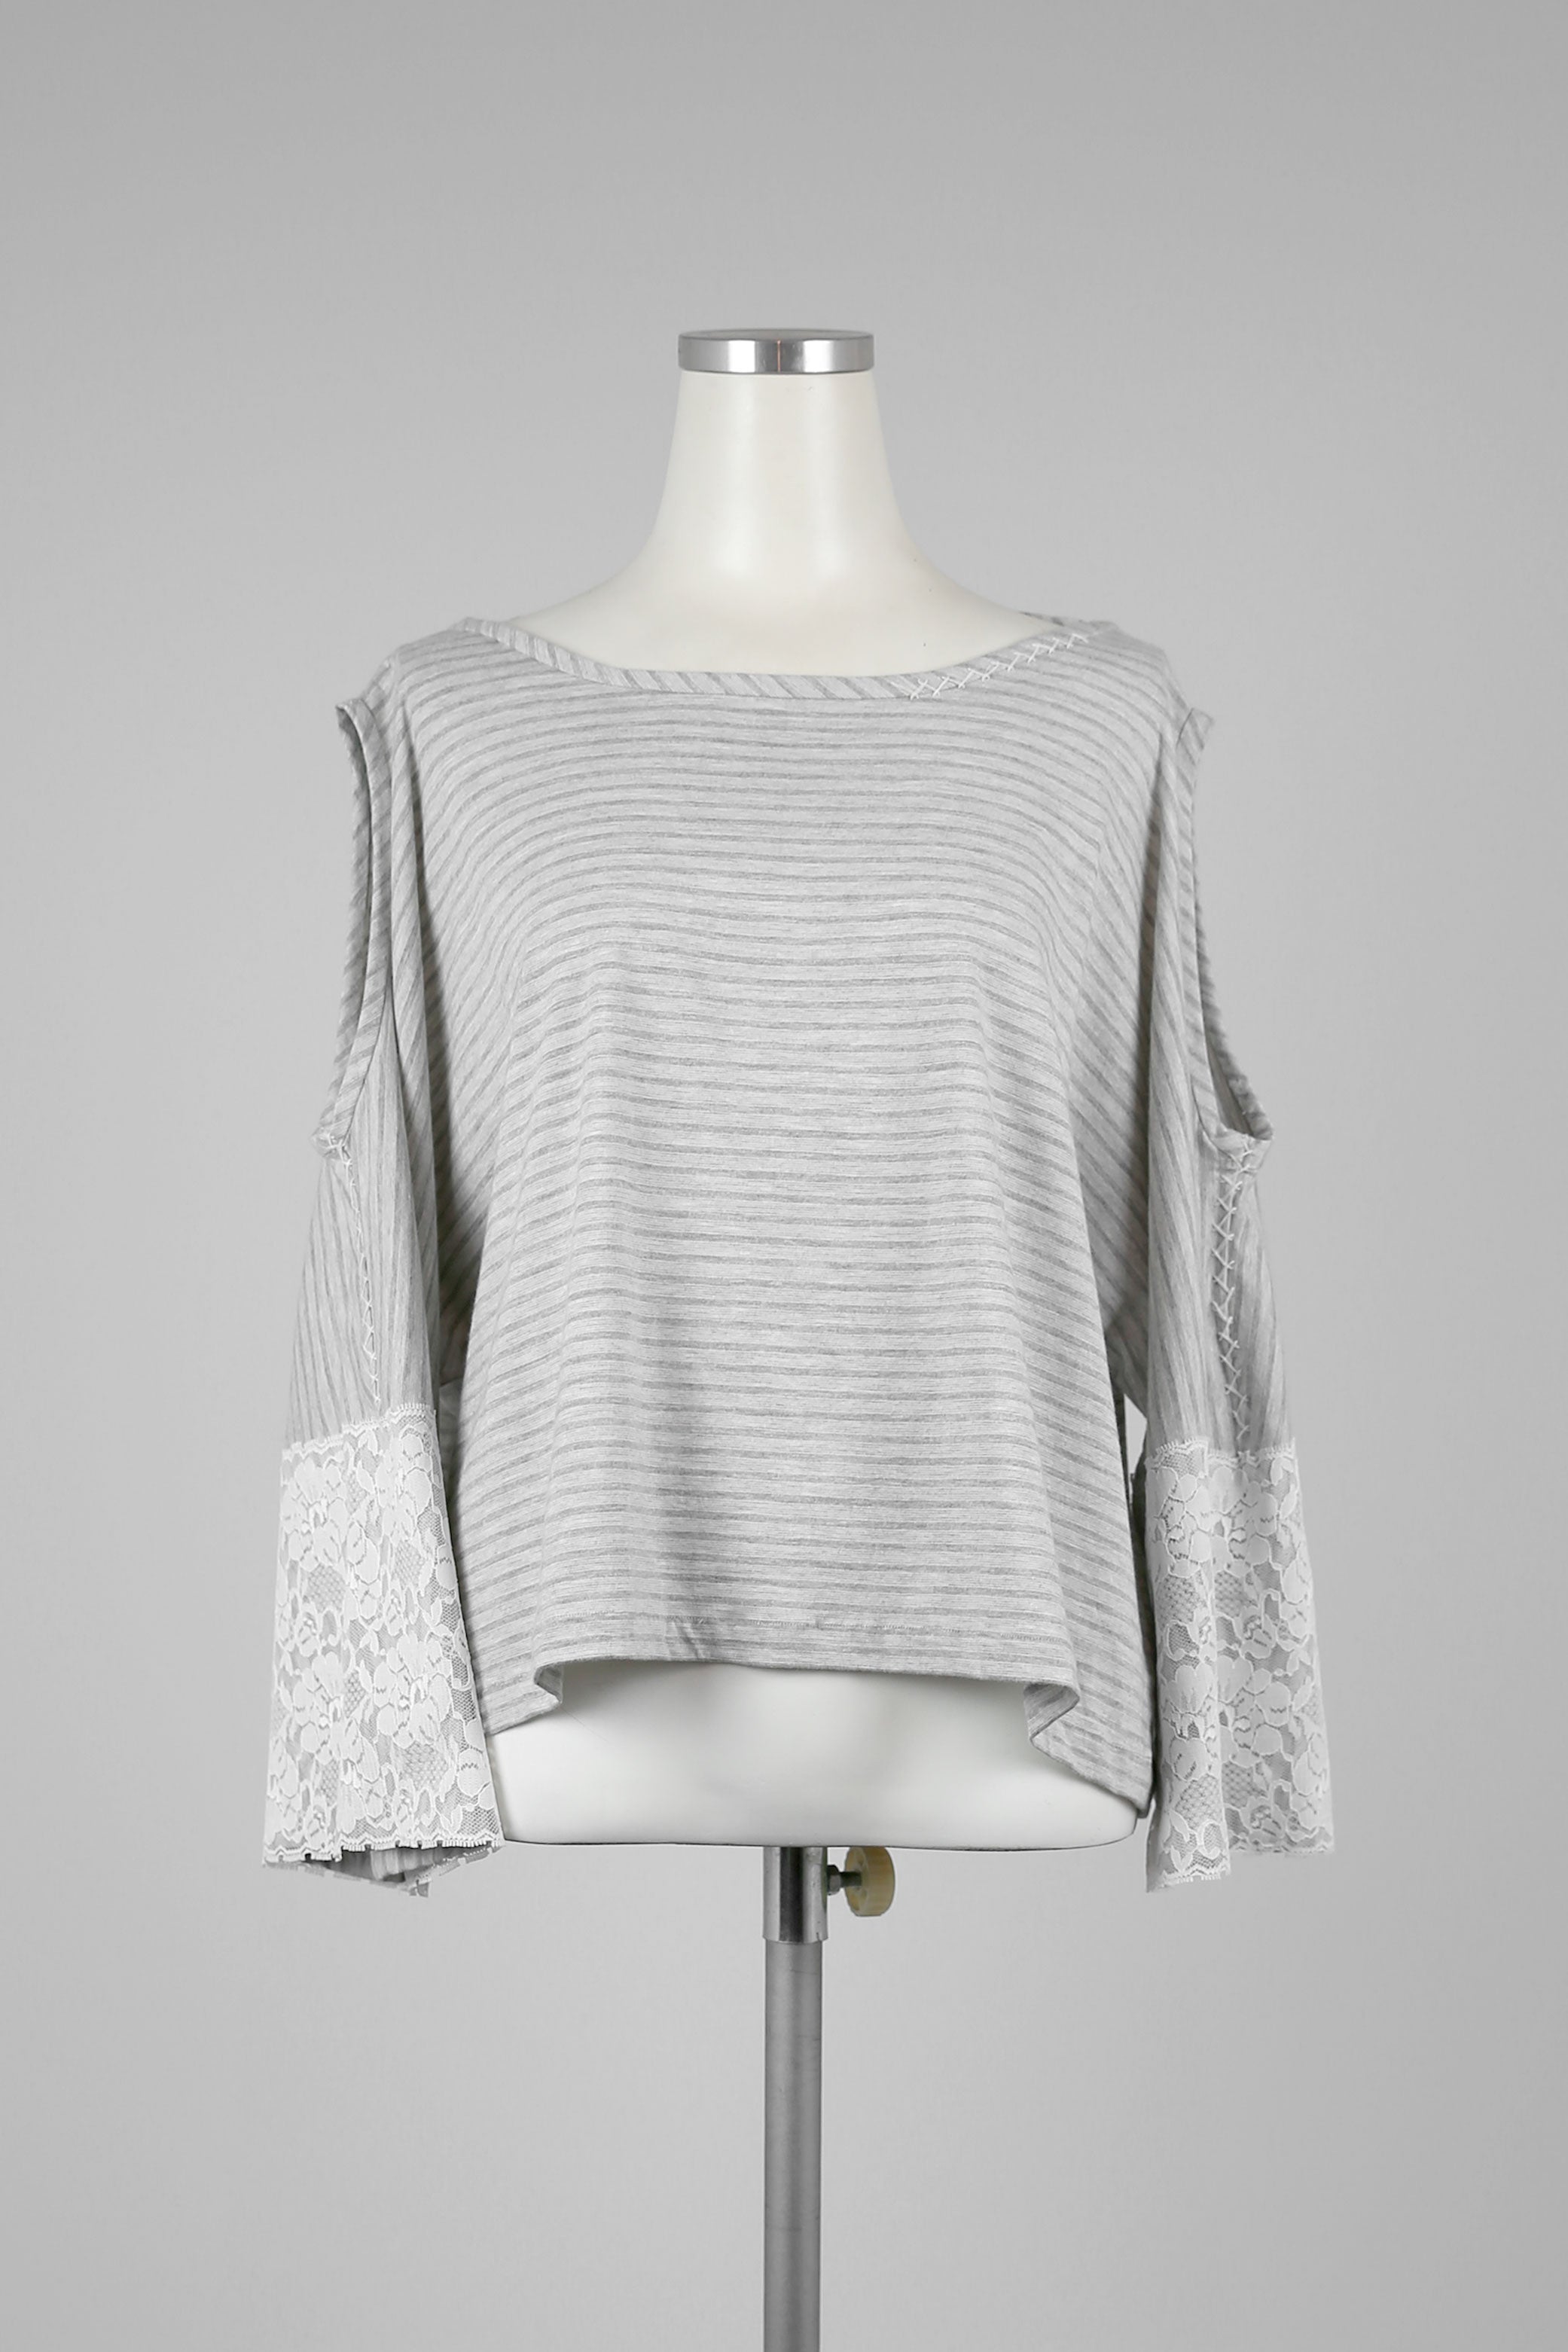 Gray Striped Top - Tae With Jane NY